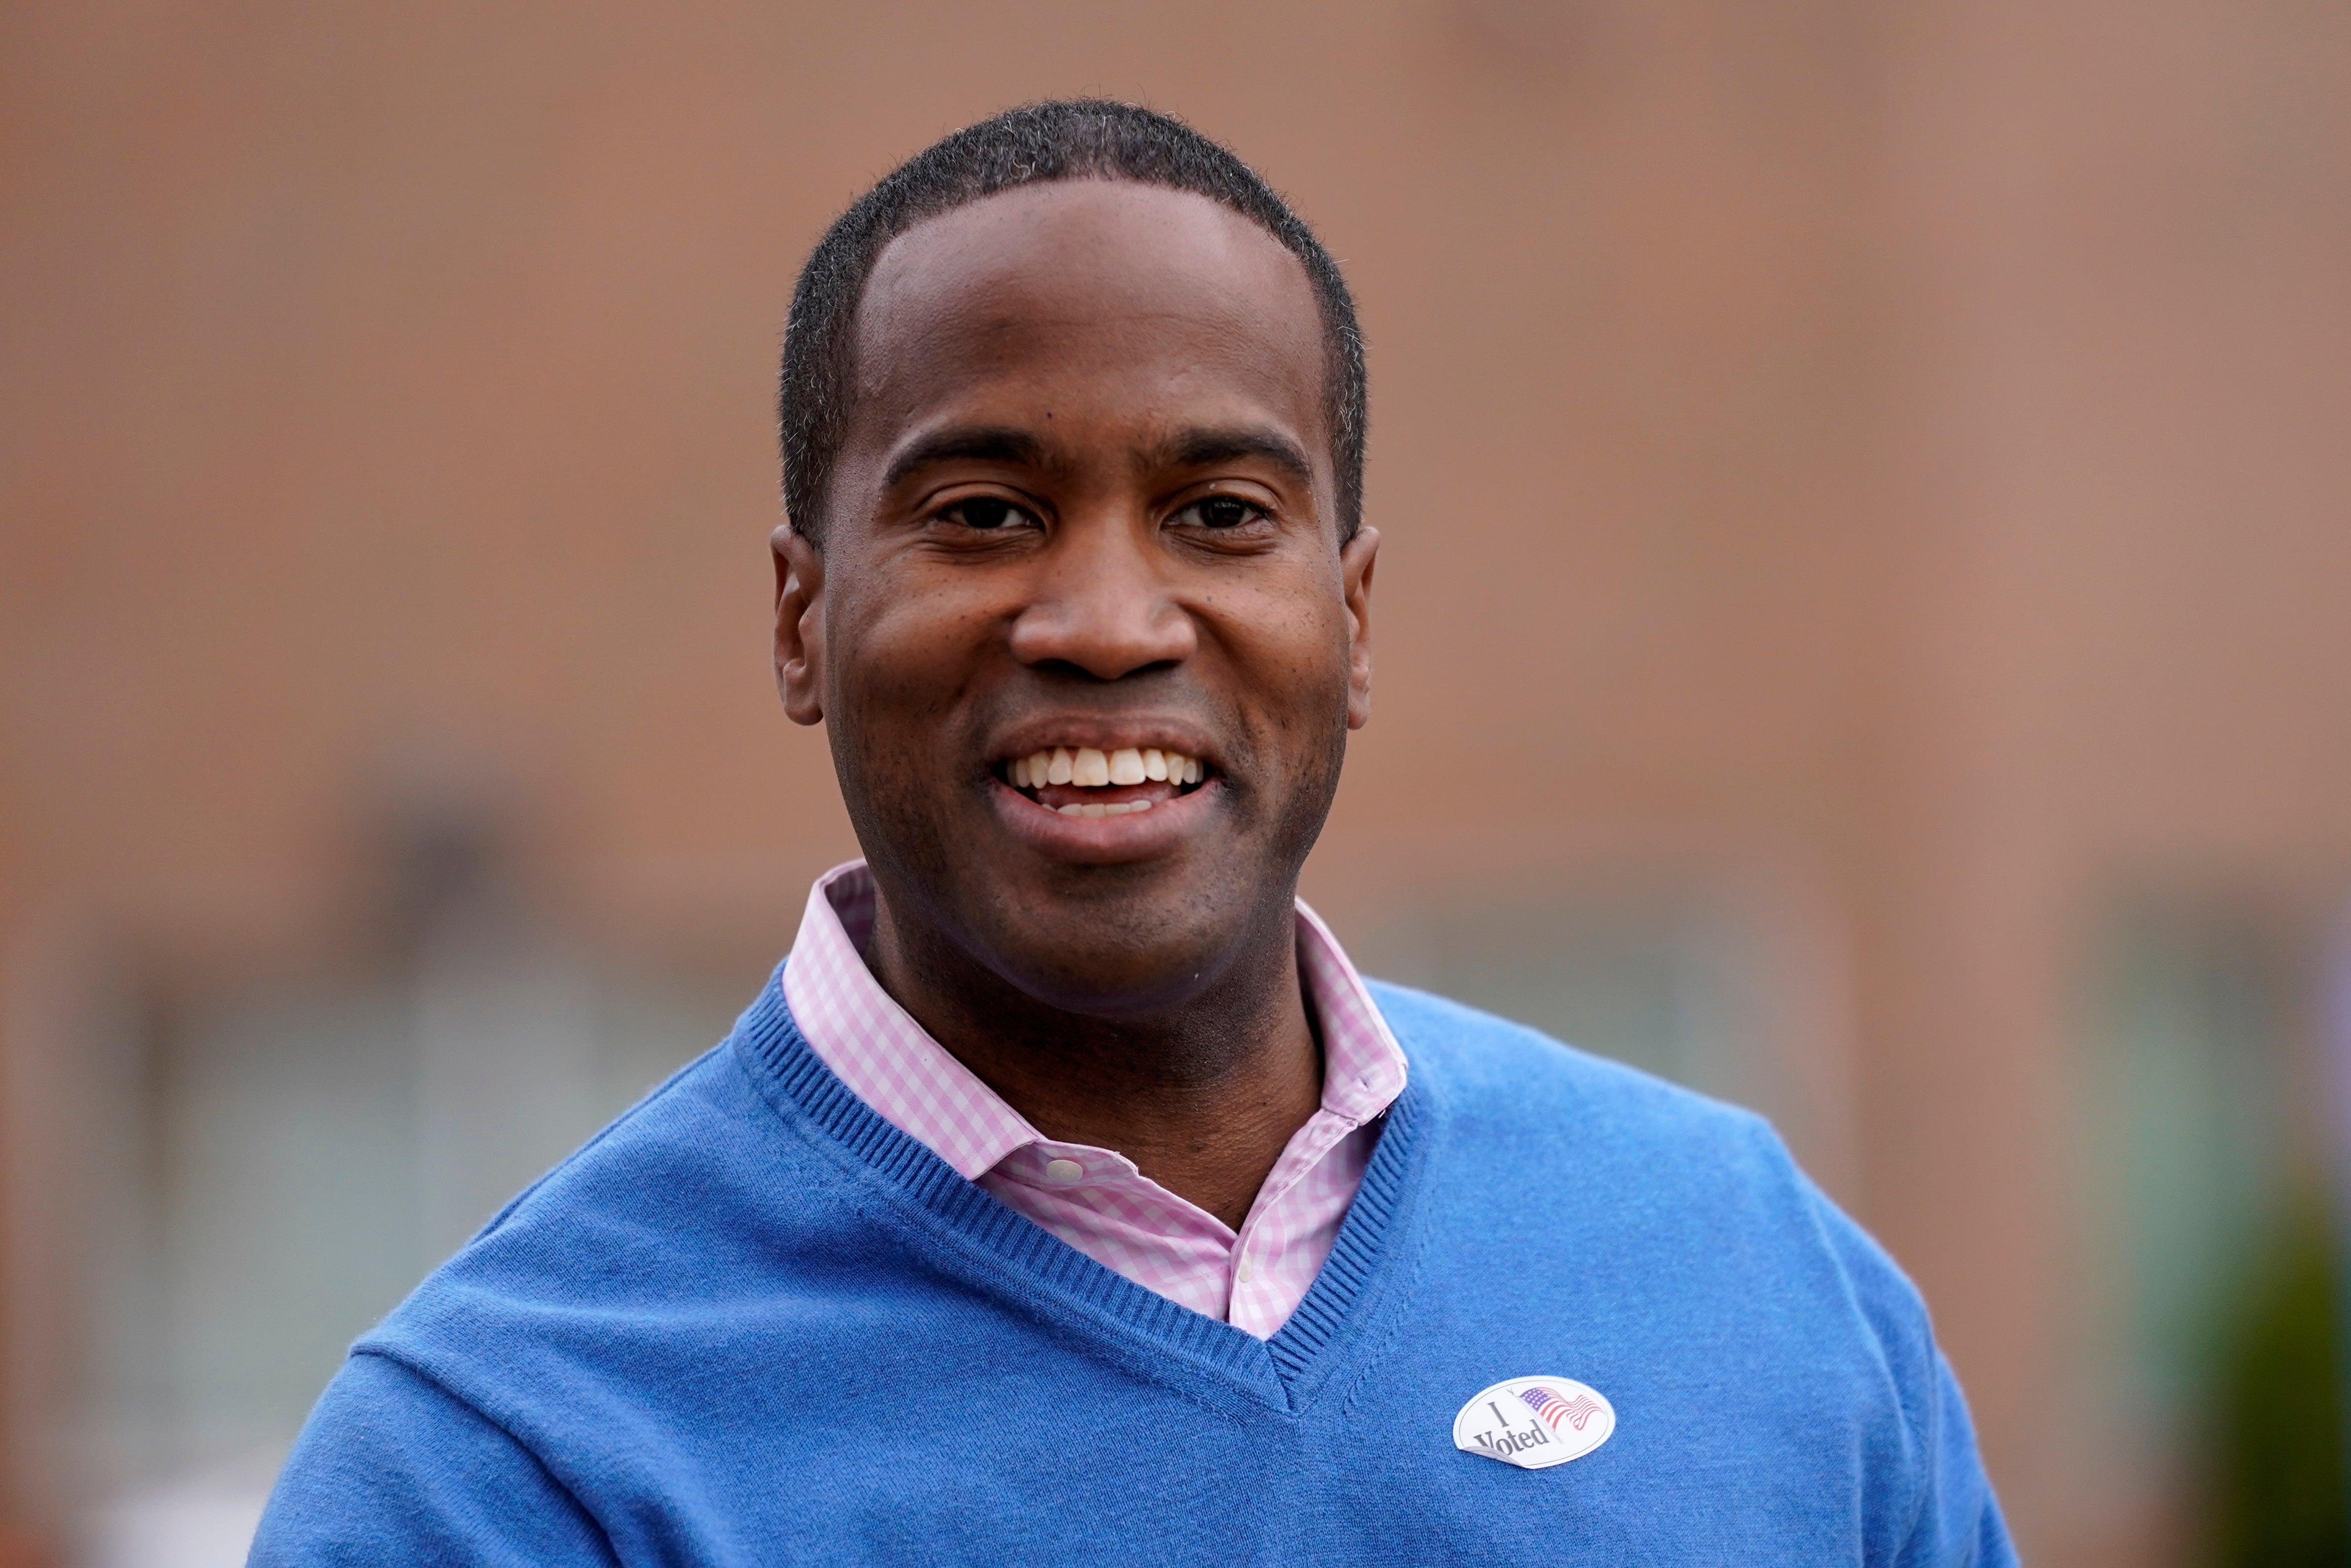 Two-time Republican Senate candidate John James launches bid for newly created House seat in Michigan